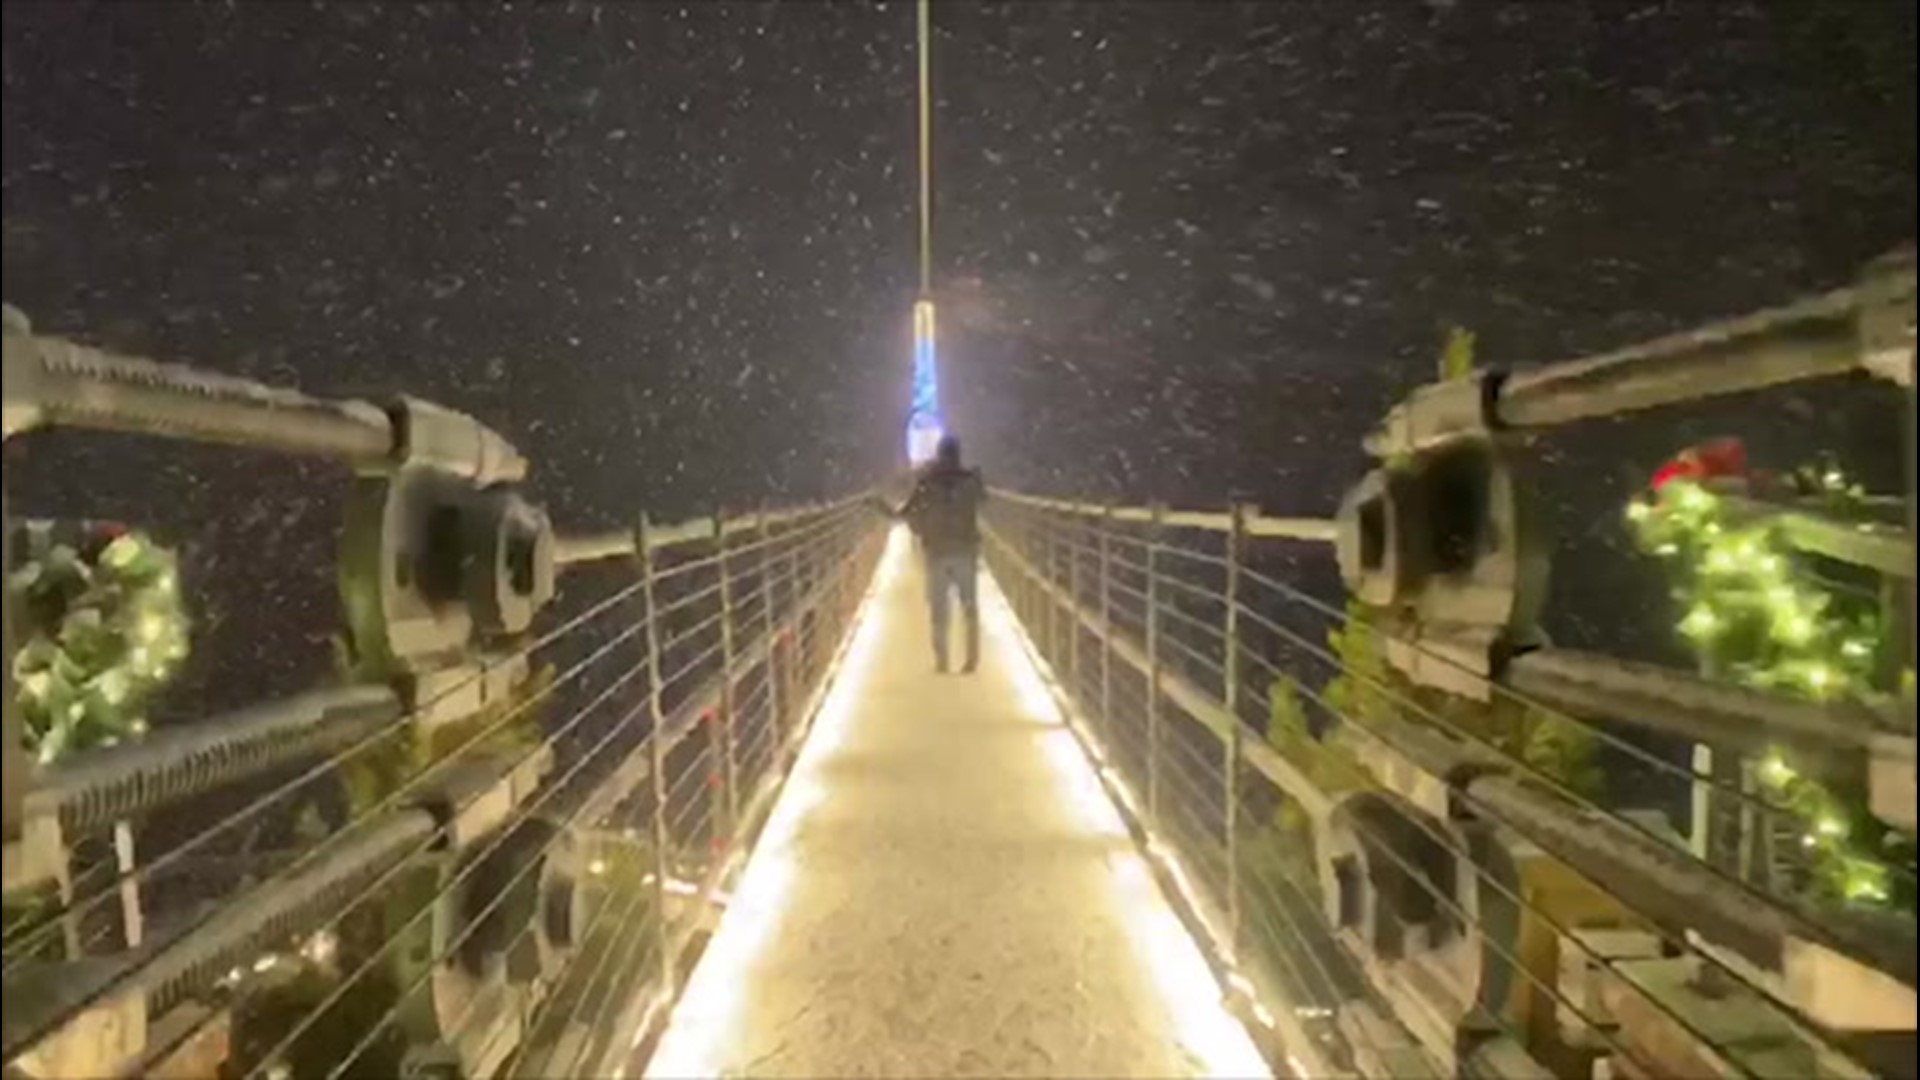 Gatlinburg SkyBridge gets covered with snow as storm brings inches to